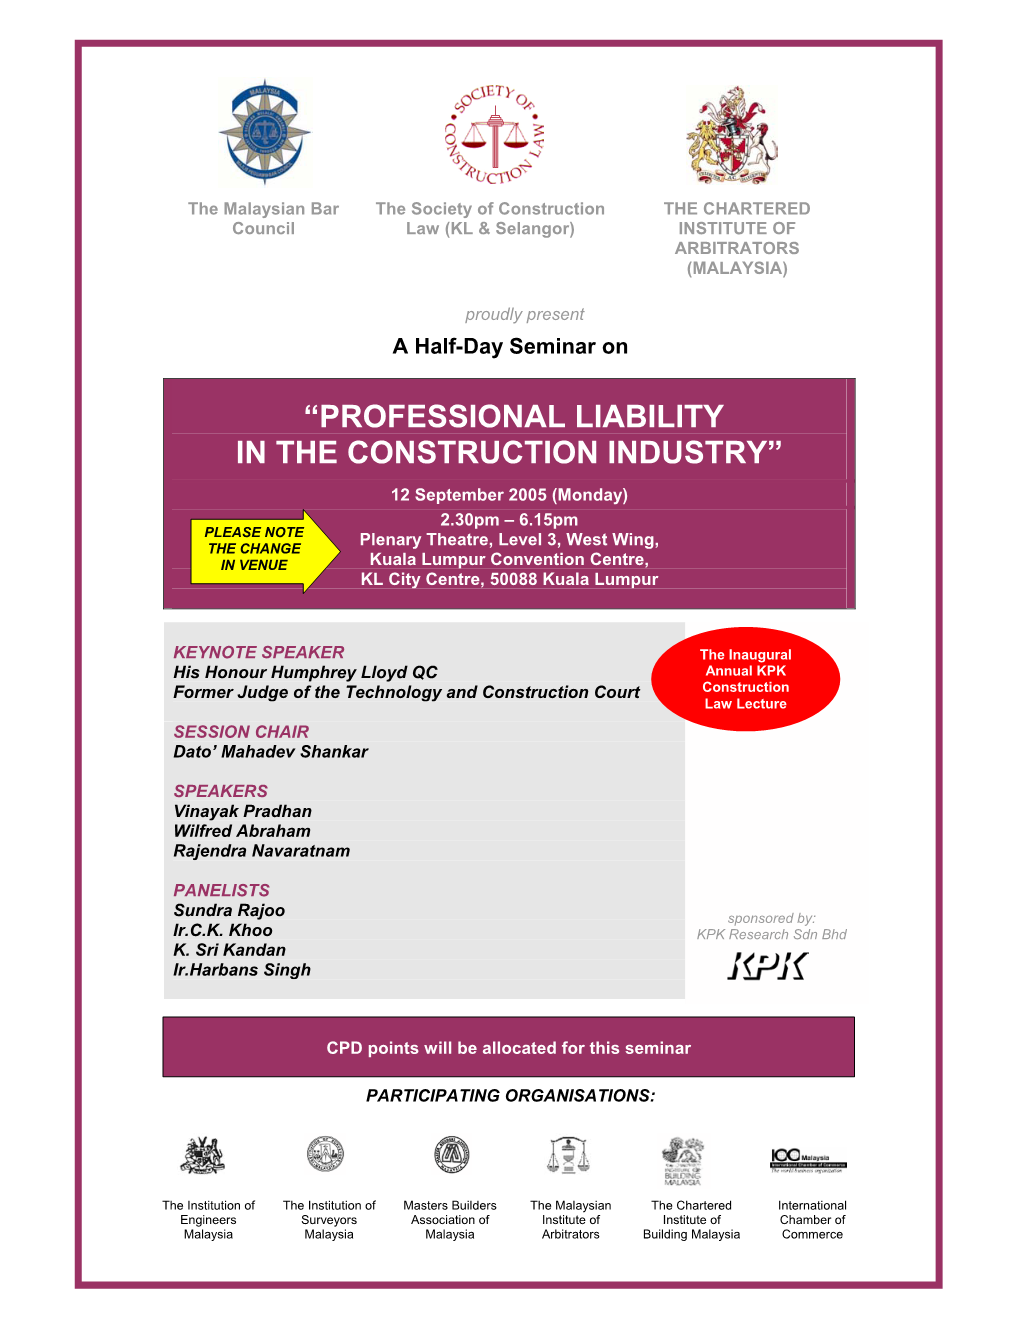 “Professional Liability in the Construction Industry”